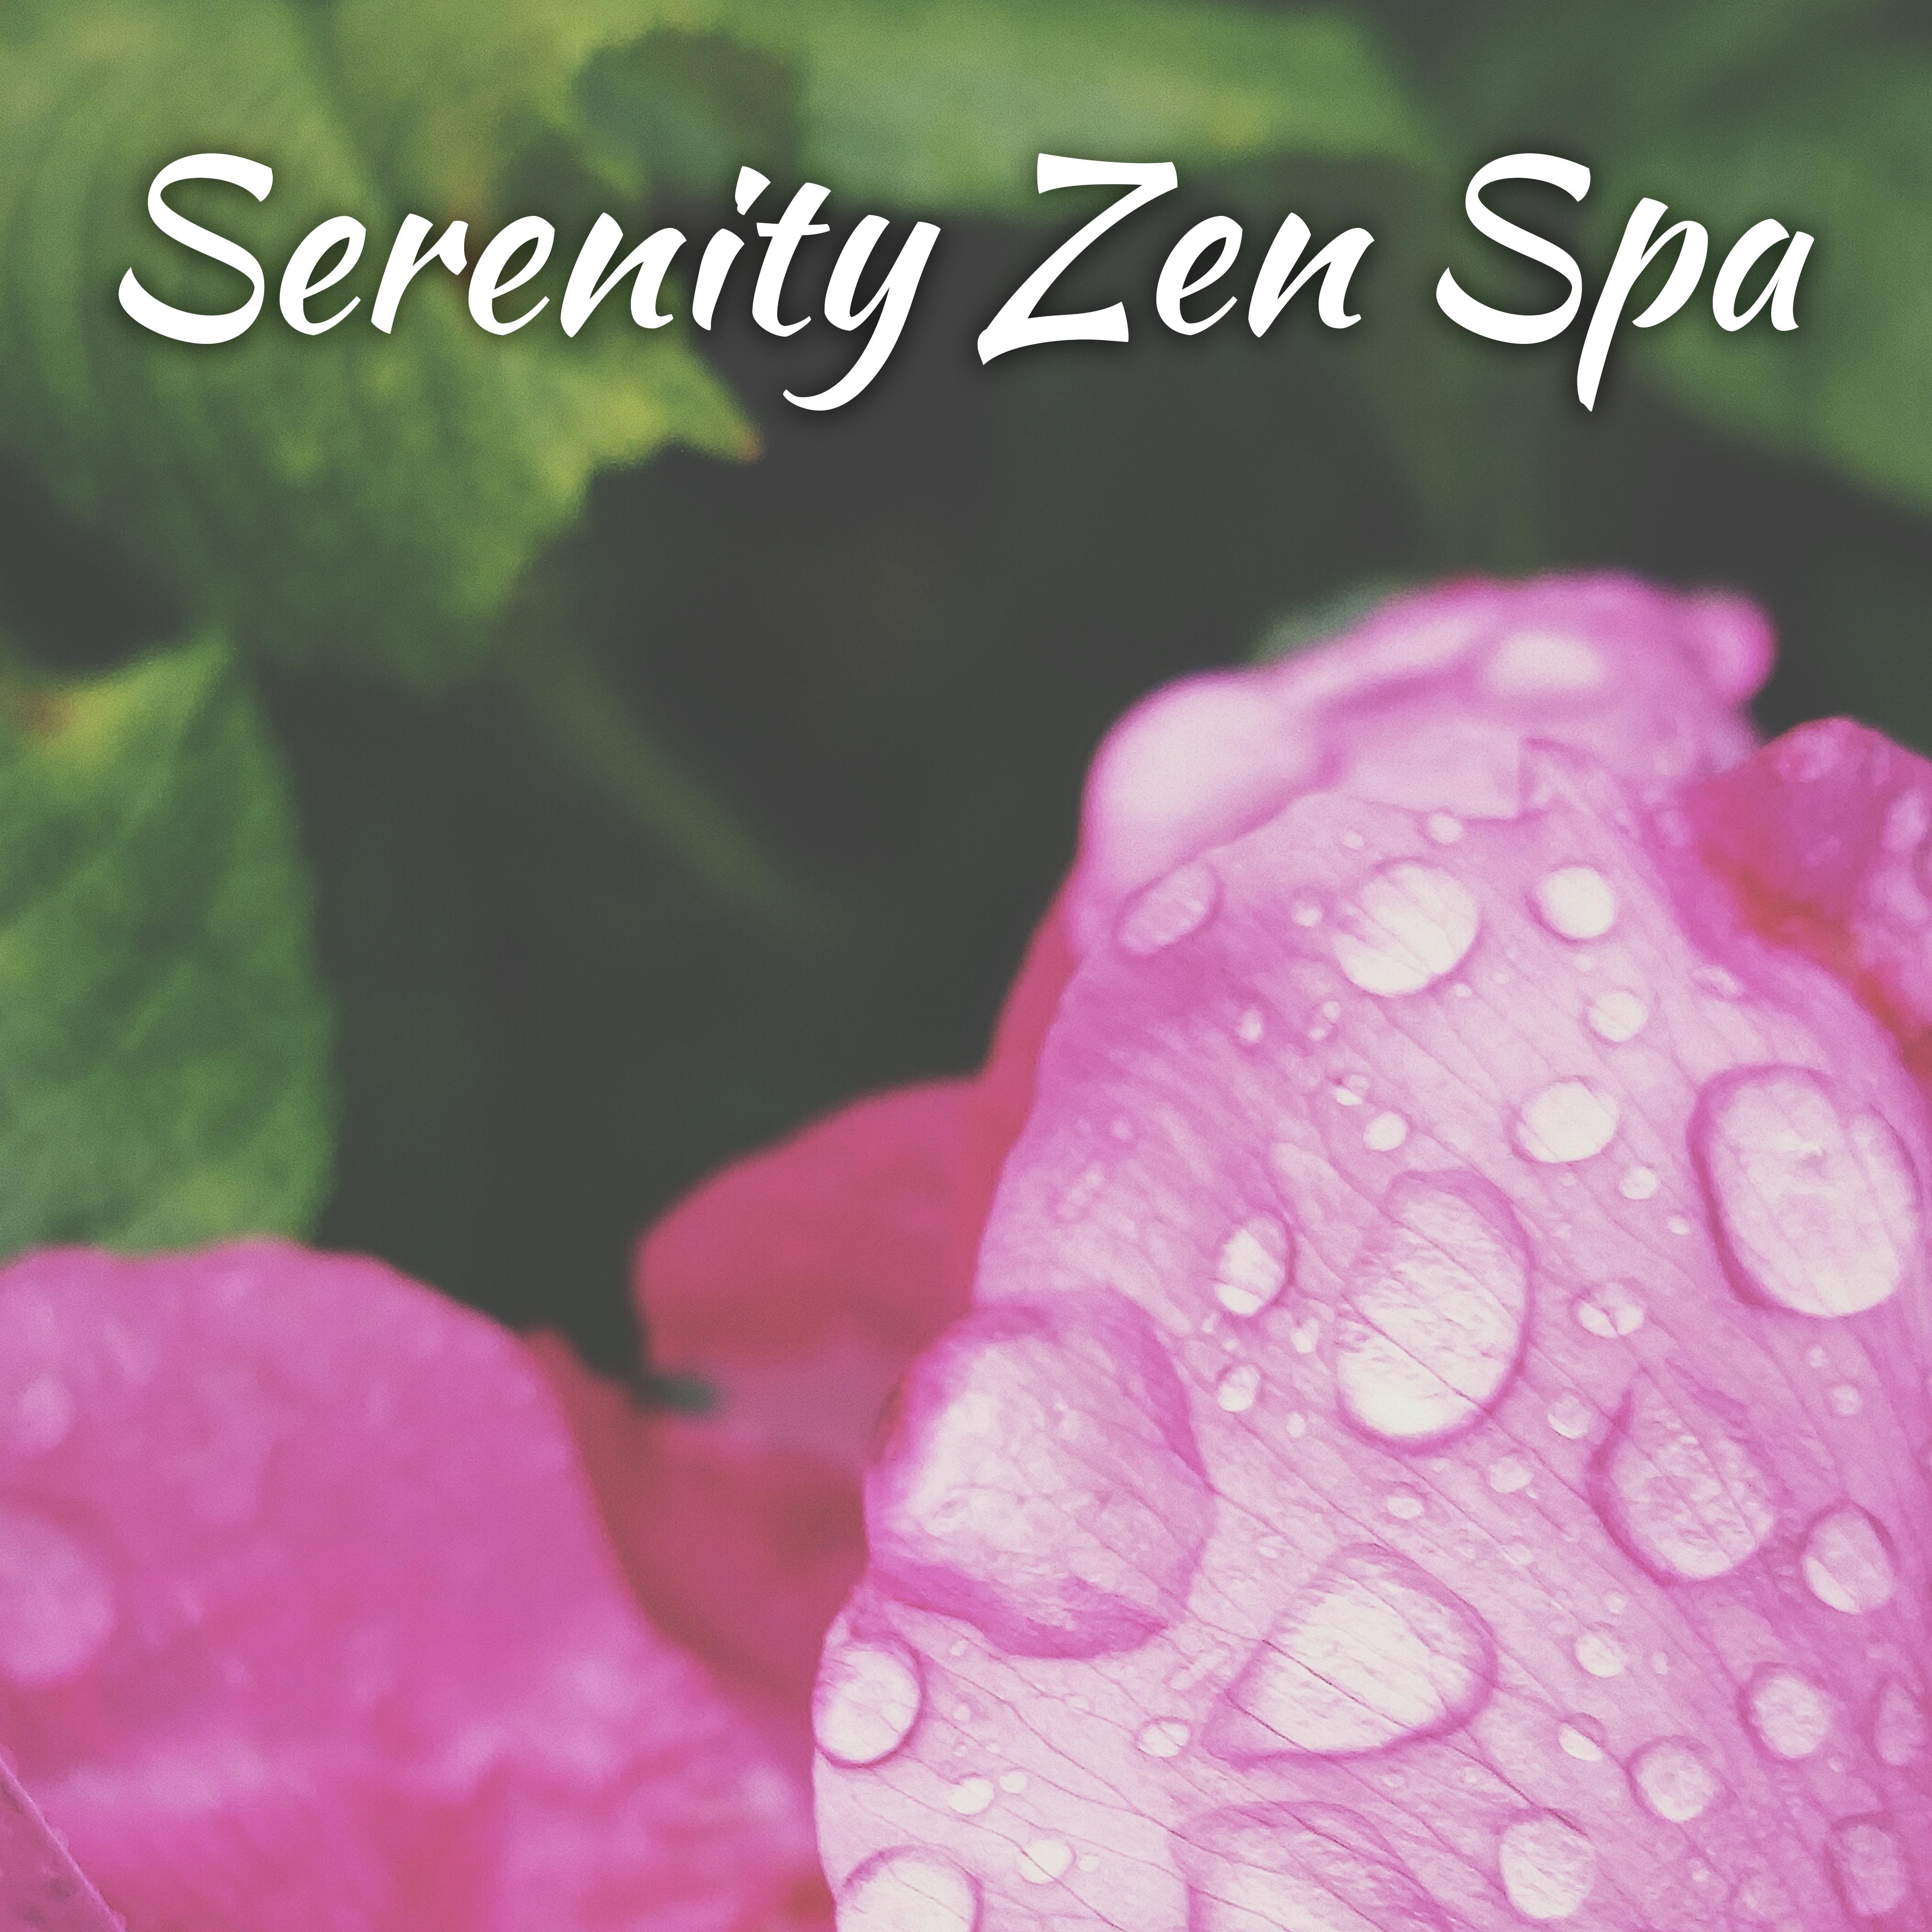 Serenity Zen Spa – Soft Music for Relaxation, Ocean Waves, Nature Sounds to Rest, Ambient Music, Deep Massage, Wellness, Relief